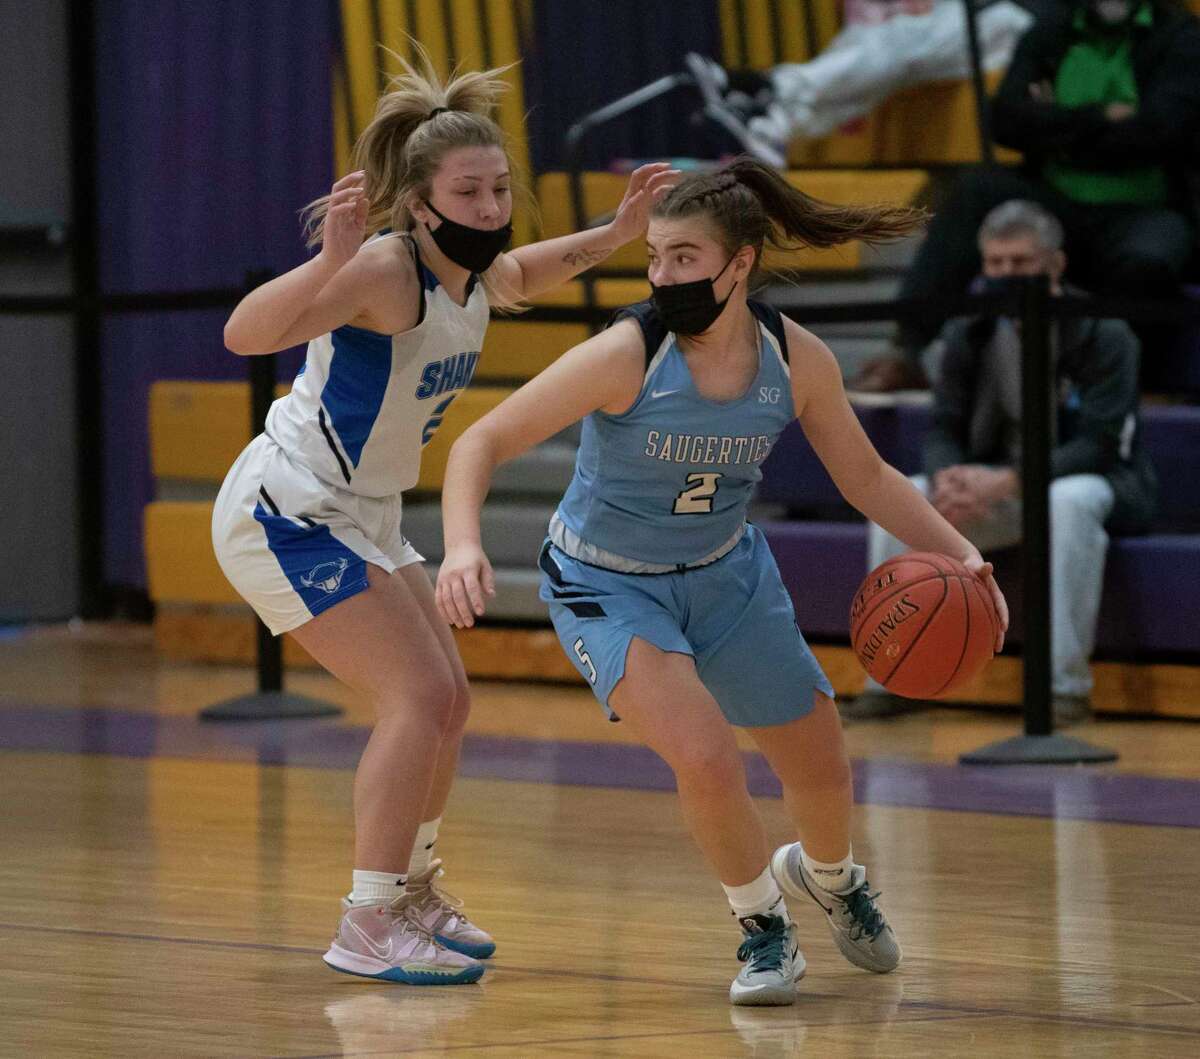 Shaker’s Cece Boisvert, left, guards Saugerties’ Natalie Tucker during a basketball game on Tuesday, Dec. 28, 2021 in Amsterdam, N.Y.